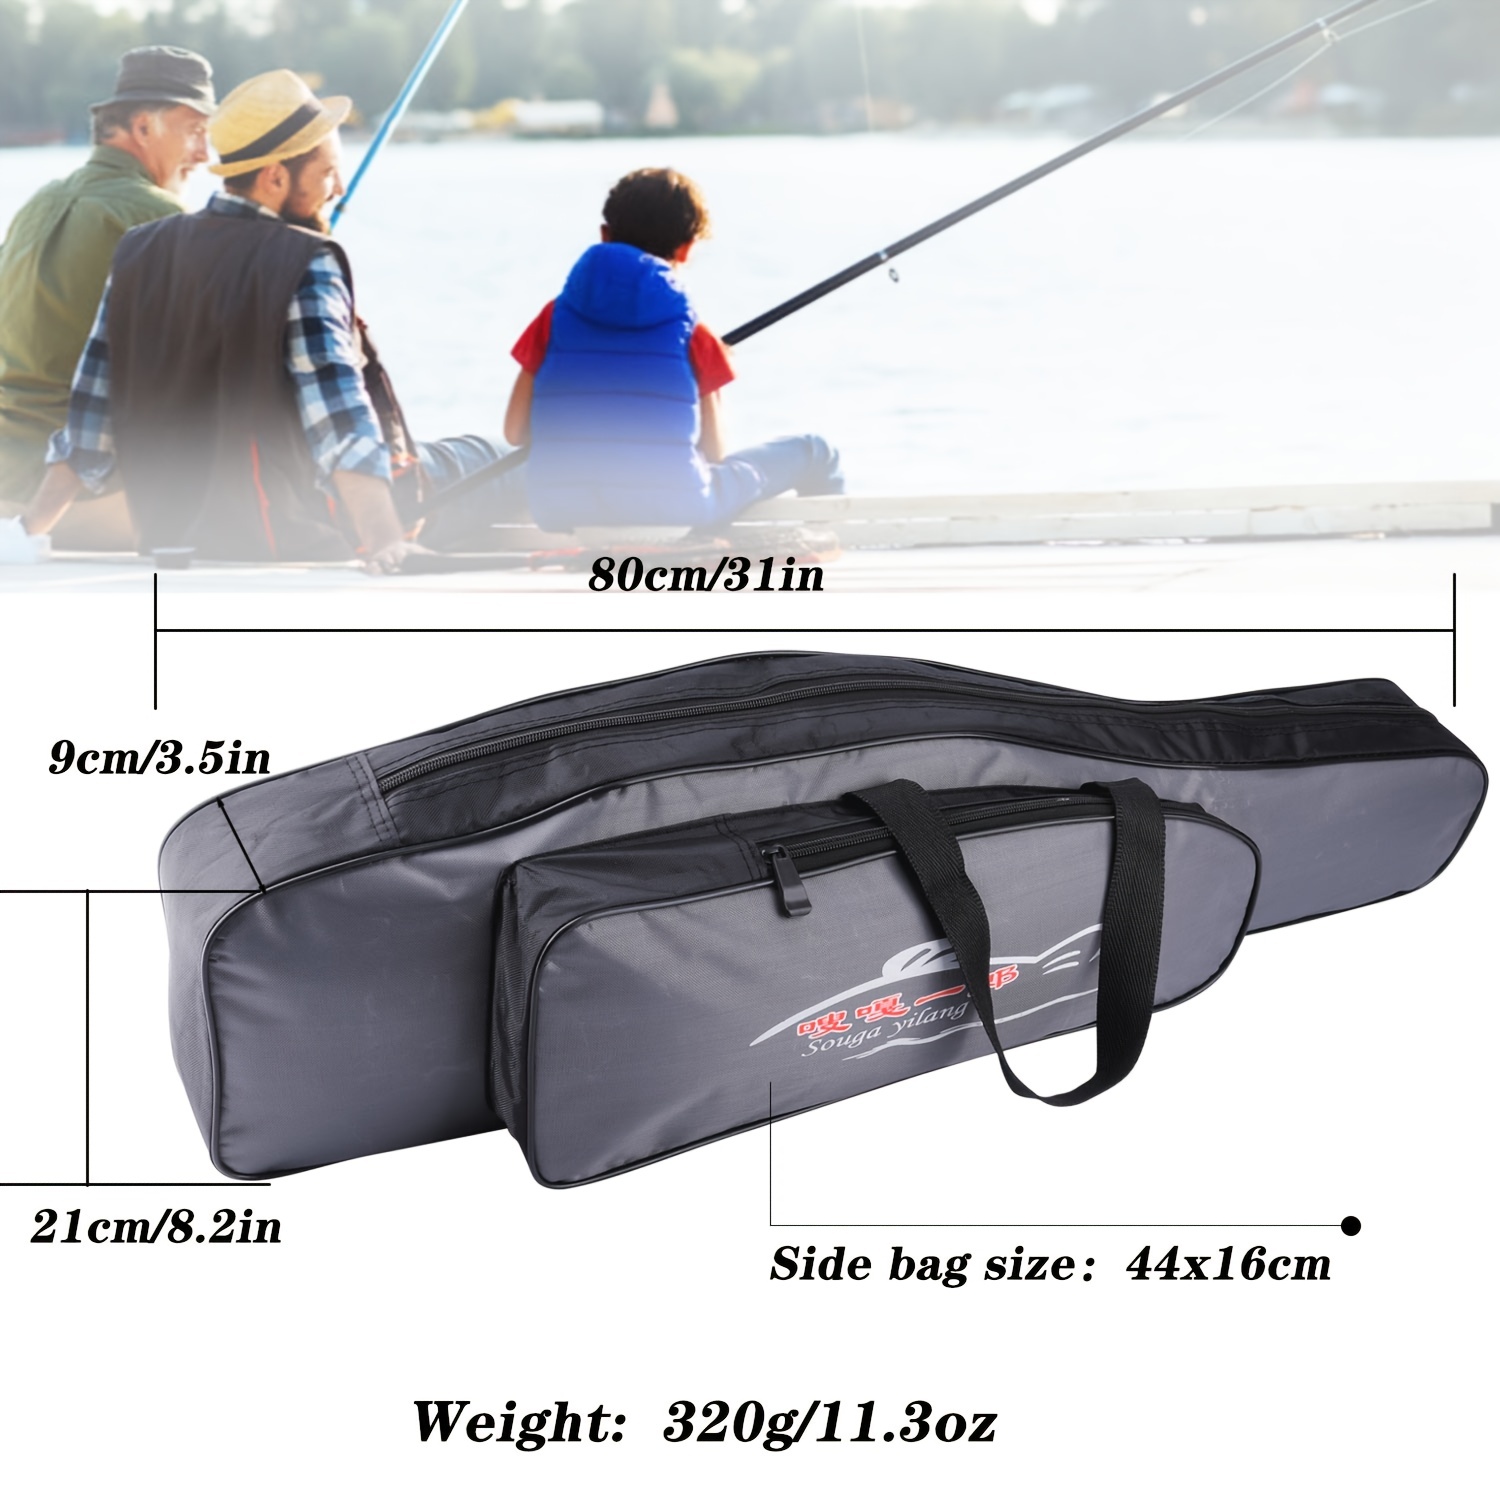 1pc Sougayilang Fishing Bag - Travel Case with Rod Holder, Lures, Tackles,  and Accessories for Organizing and Carrying Your Gear